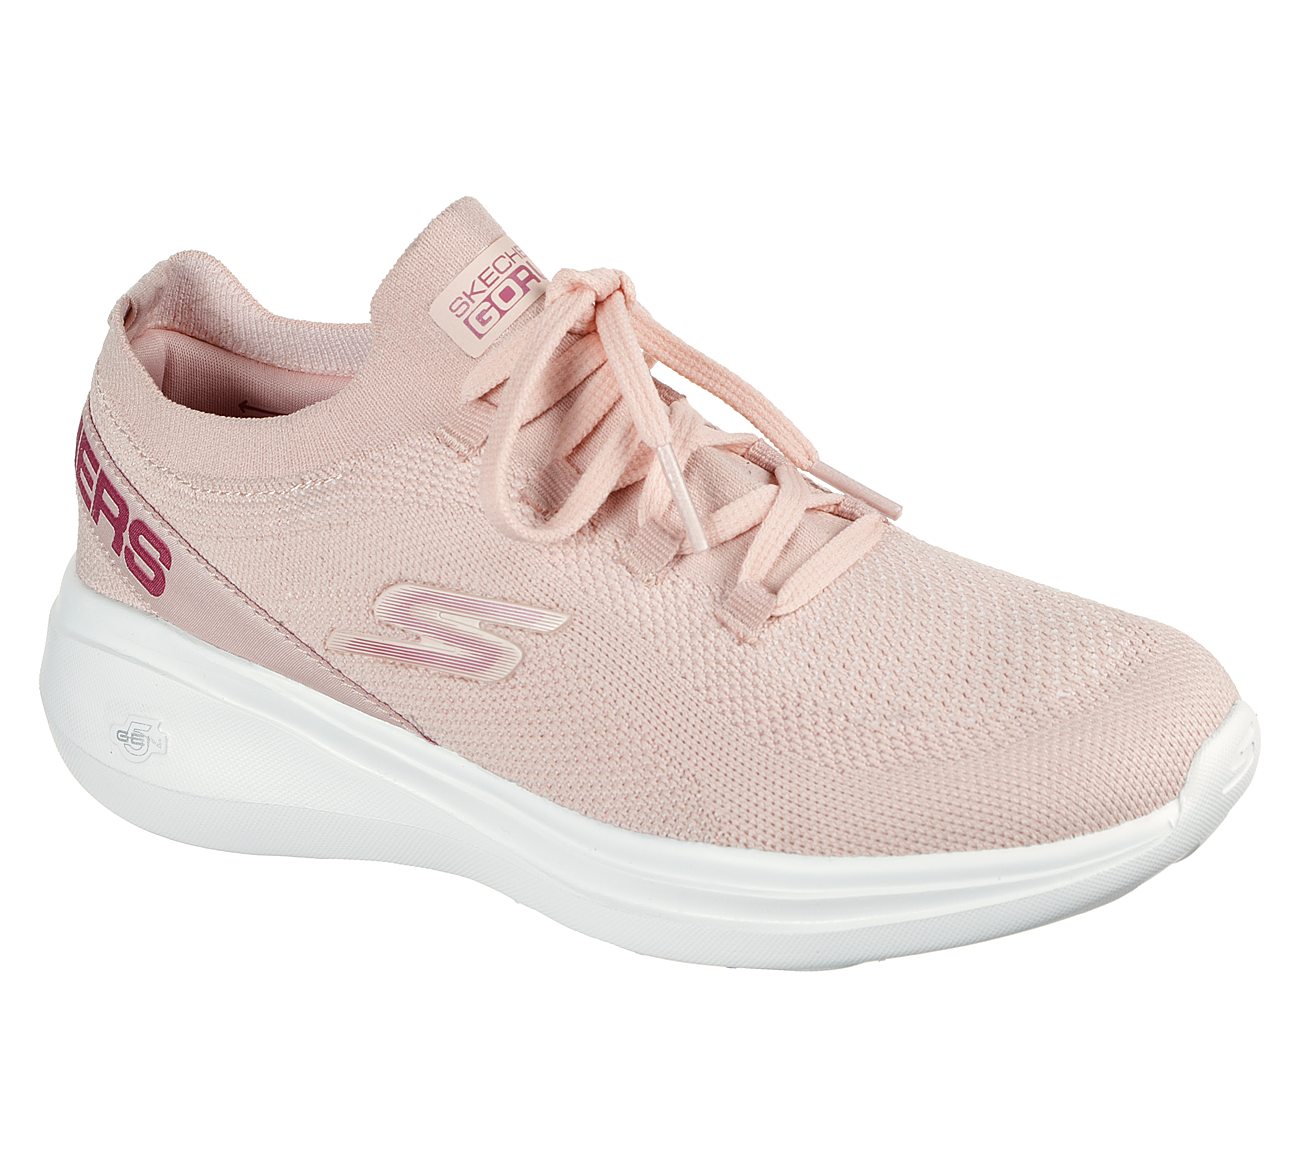 GO RUN FAST - SUNSET BEAUTY, ROSE Footwear Lateral View